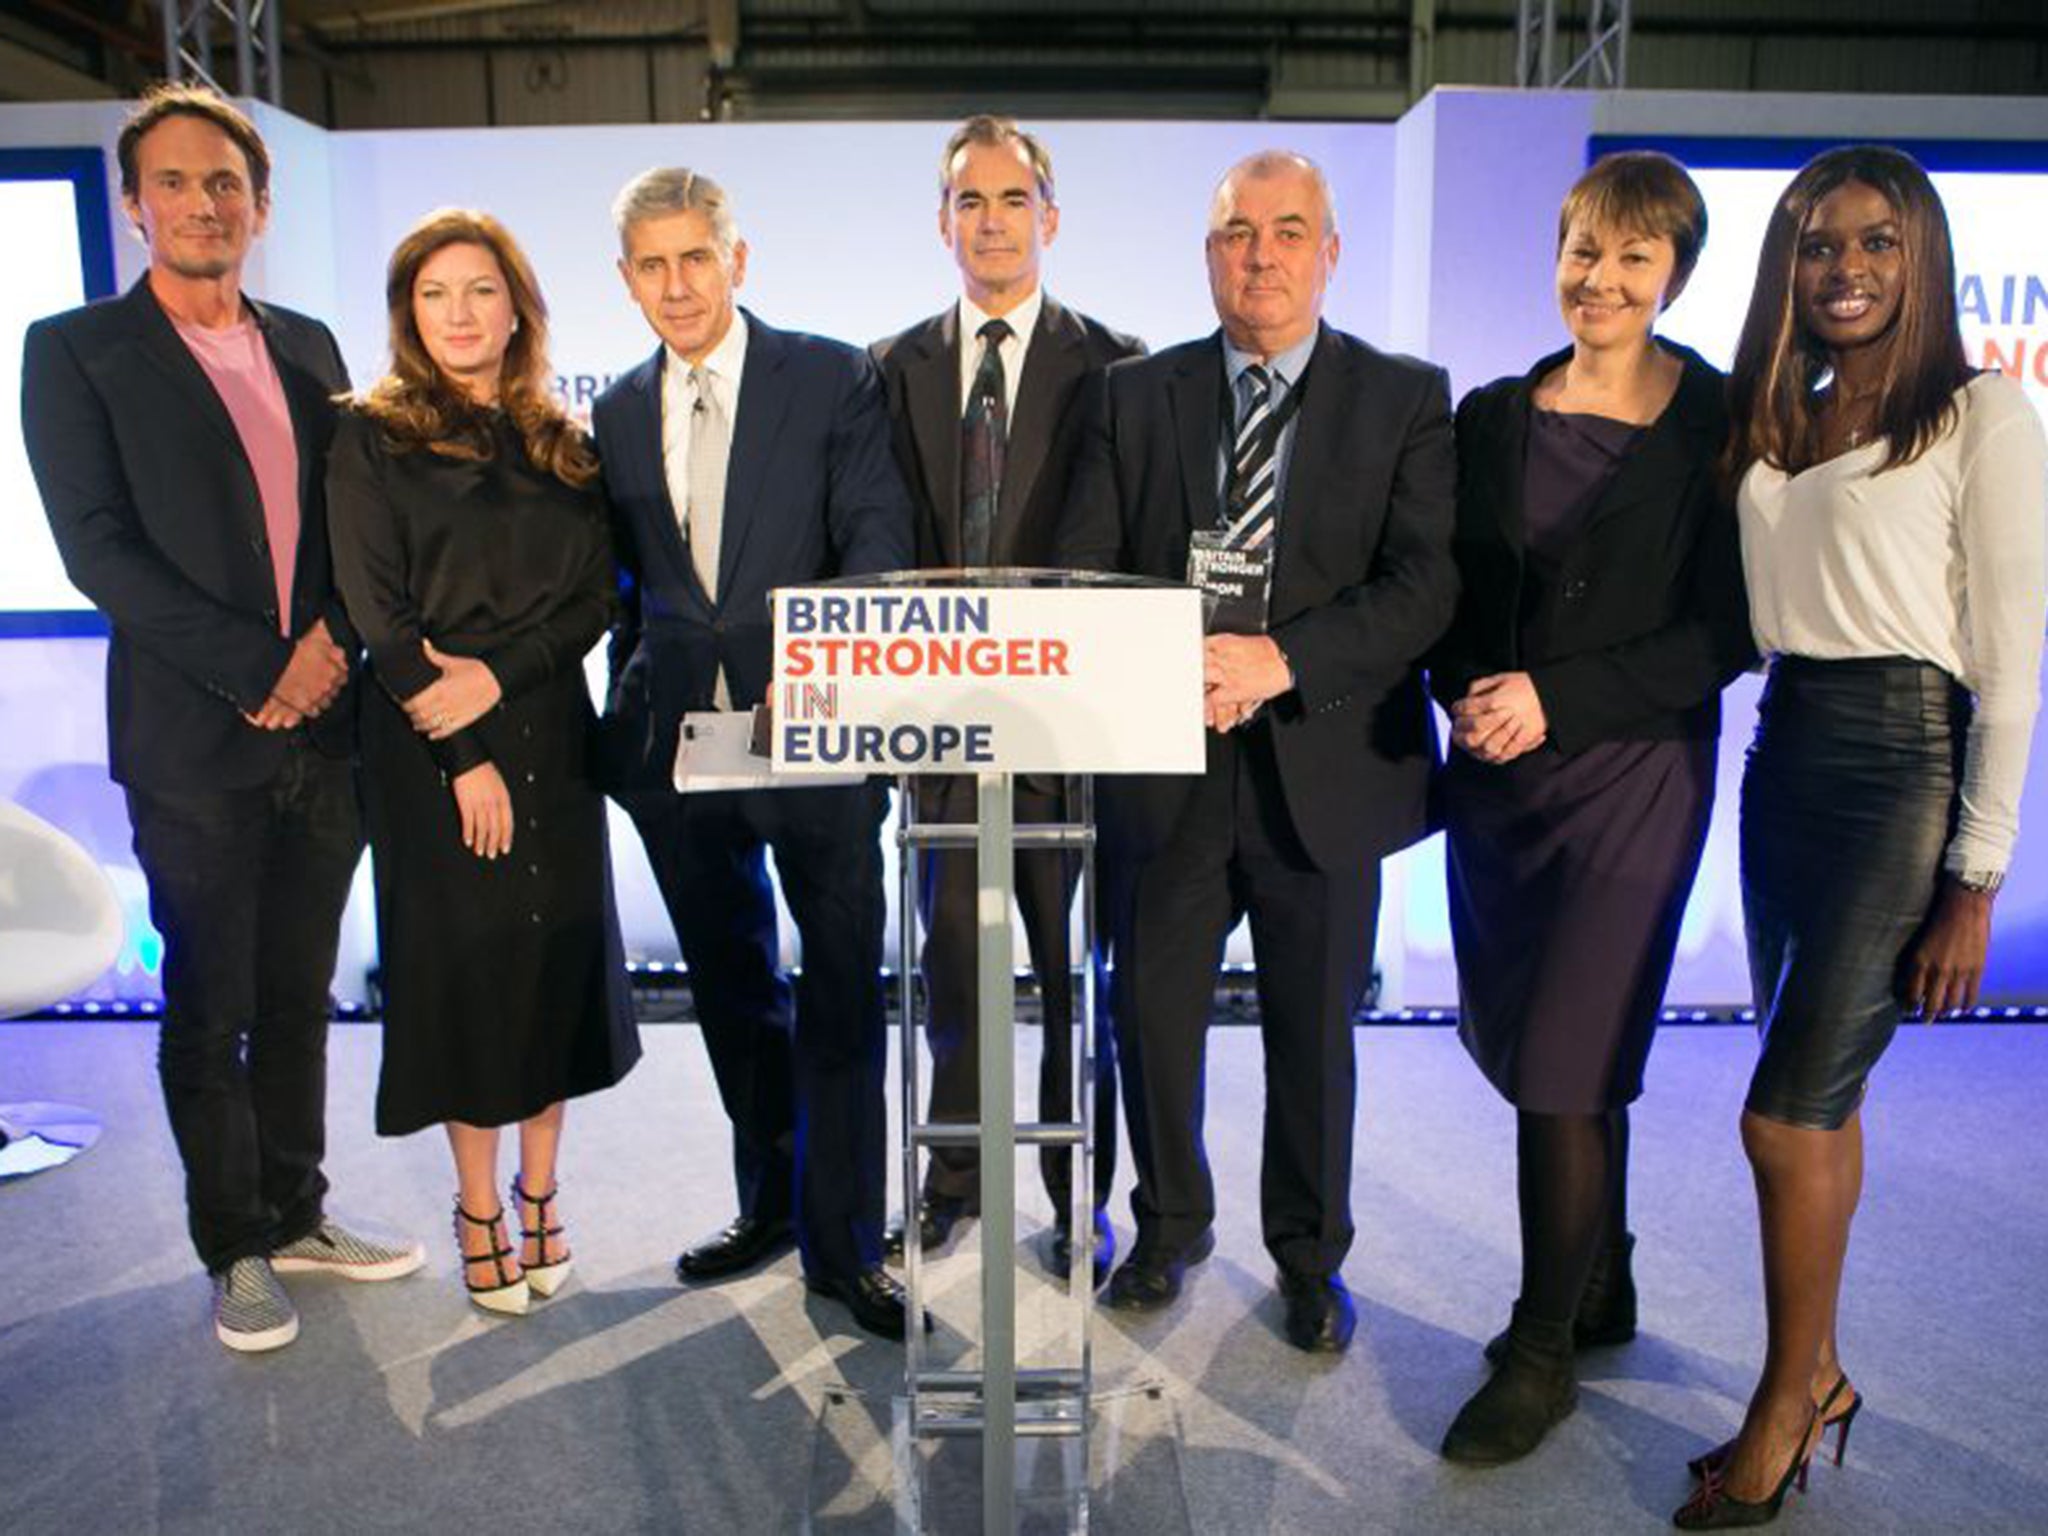 The launch of the Britain Stronger in Europe campaign in London yesterday, fronted by (left to right) Richard Reed, Karren Brady, Stuart Rose, Roland Rudd, Brendan Barber, Caroline Lucas and June Sarpong